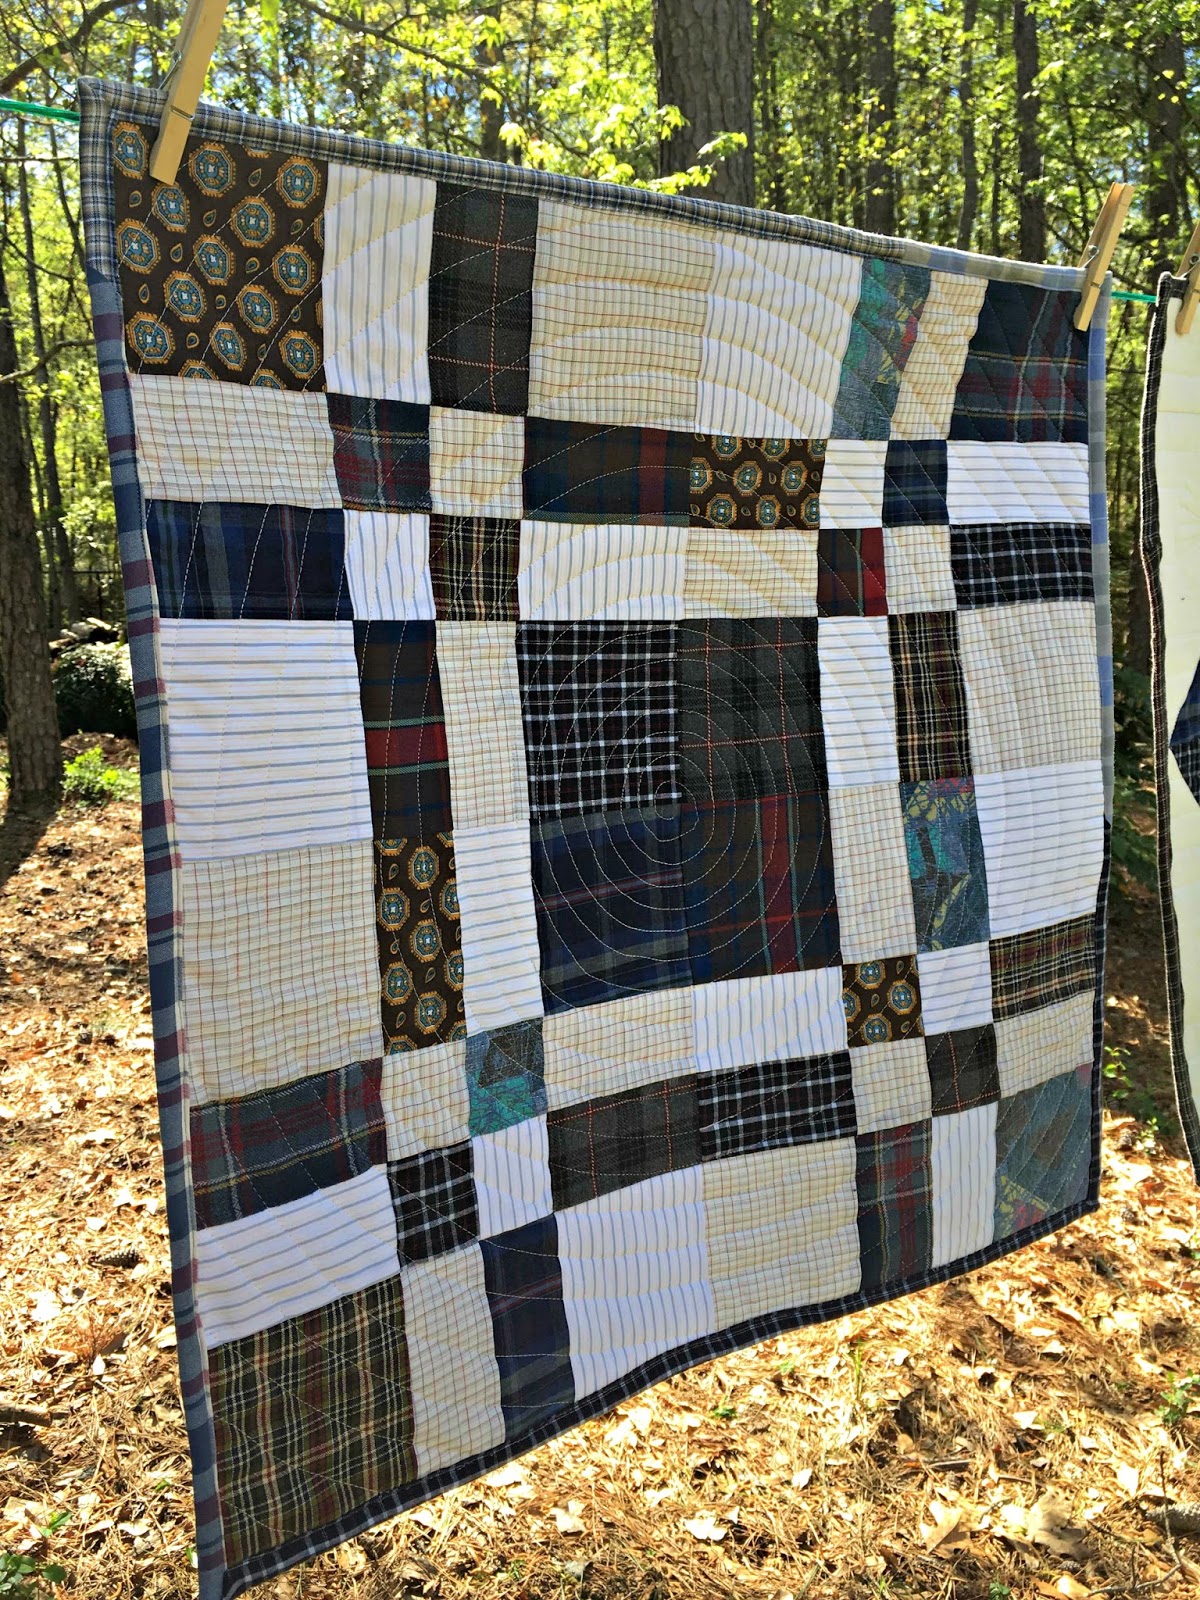 Studio Dragonfly: Five Small Memory Quilts